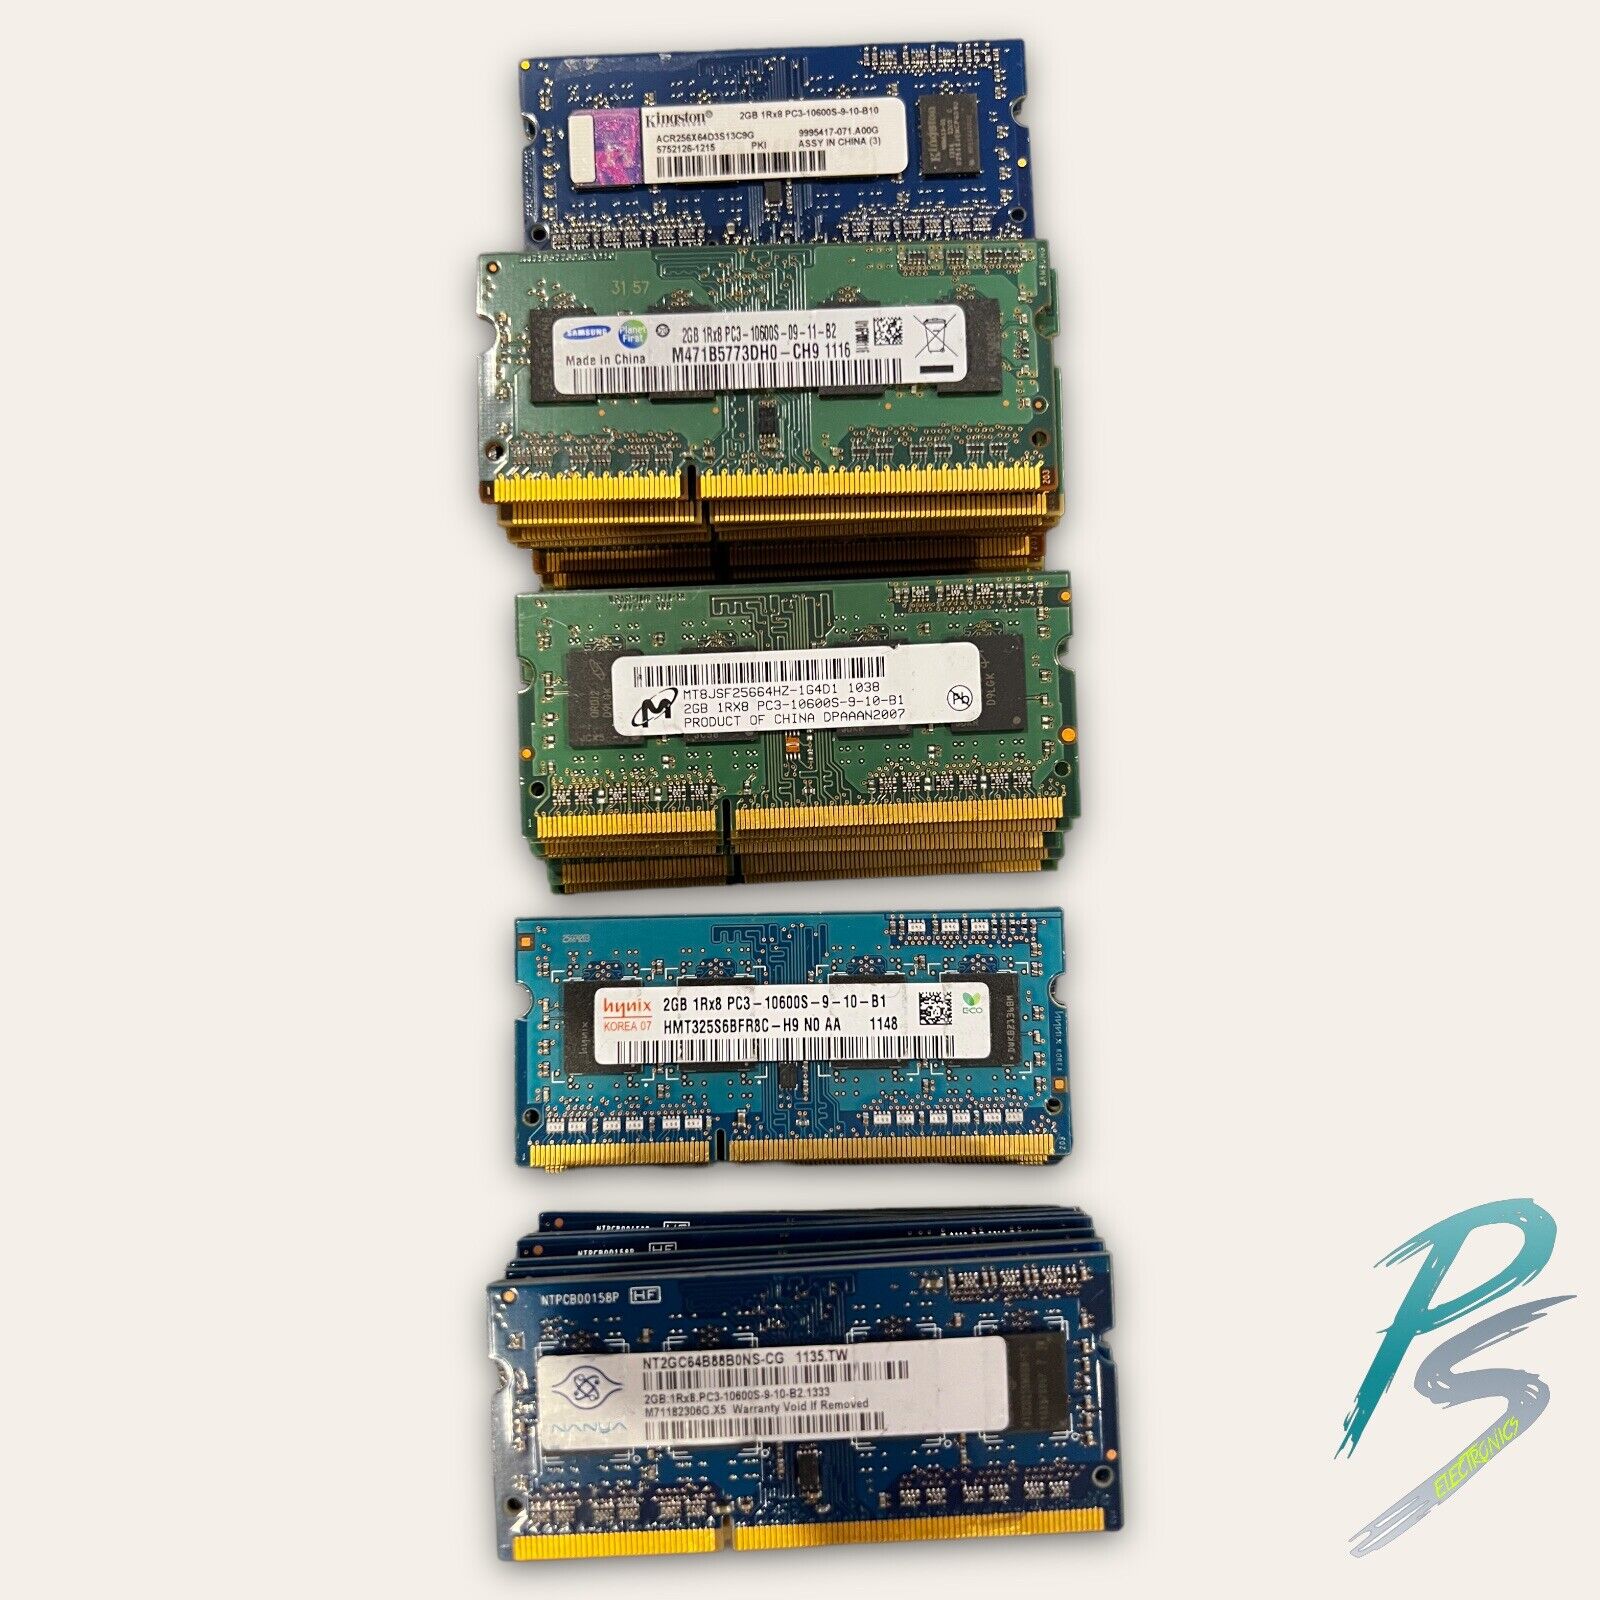 LOT OF 42 - 2GB 1Rx8 PC3-10600S DDR3 Laptop Memory RAM - Mixed Manufacturer